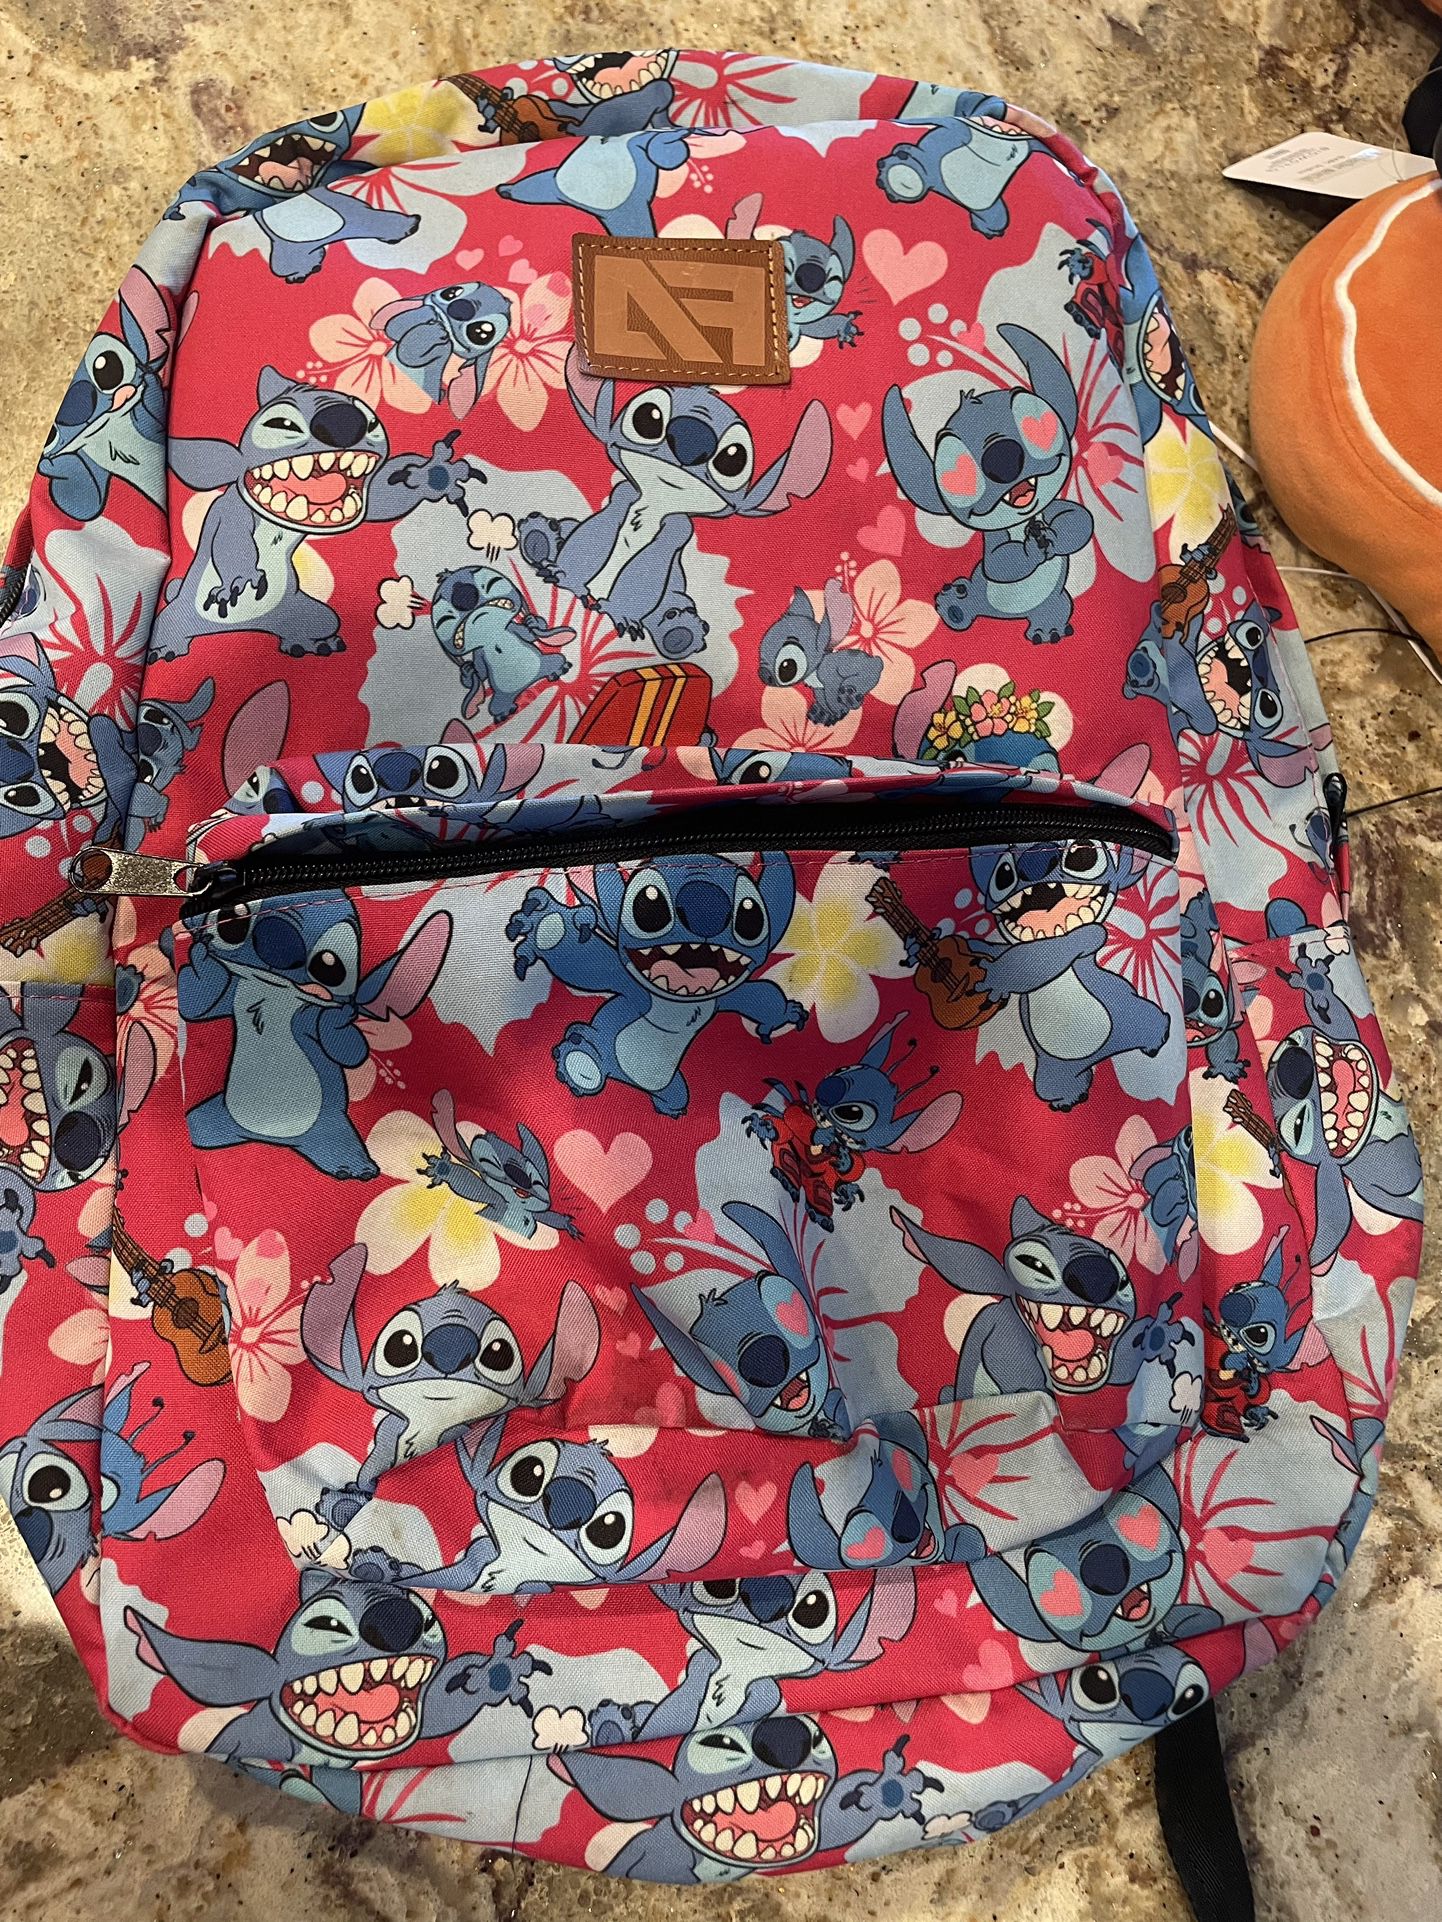 Lilo And Stitch Hawaiian Pink Flower Backpack Asian Faces Brand Rare